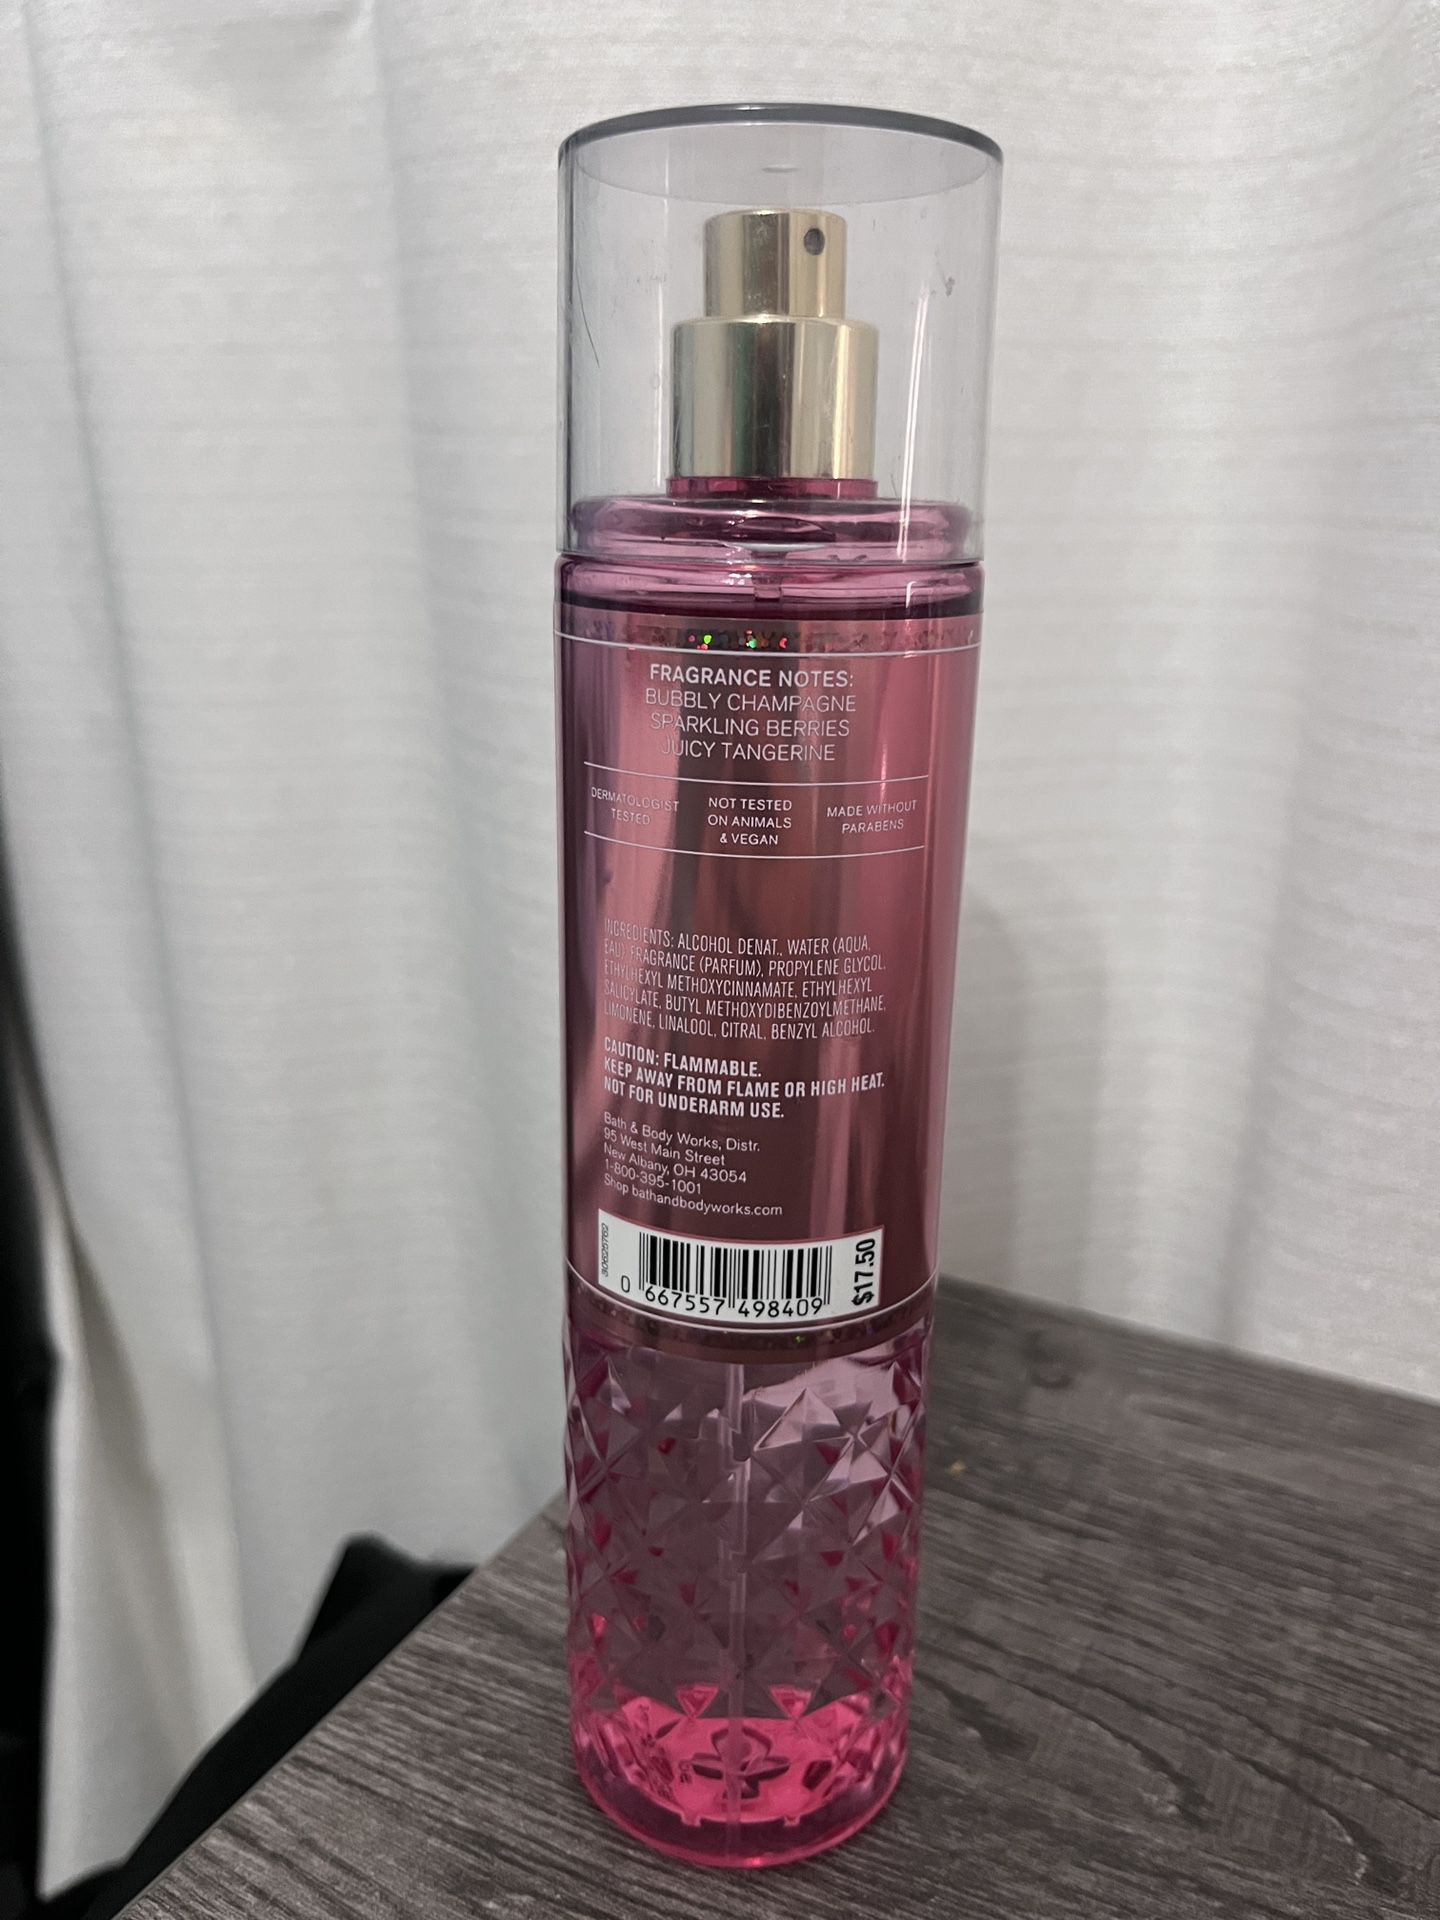 Mini Champagne Toast Perfume for Sale in Brentwood, CA - OfferUp